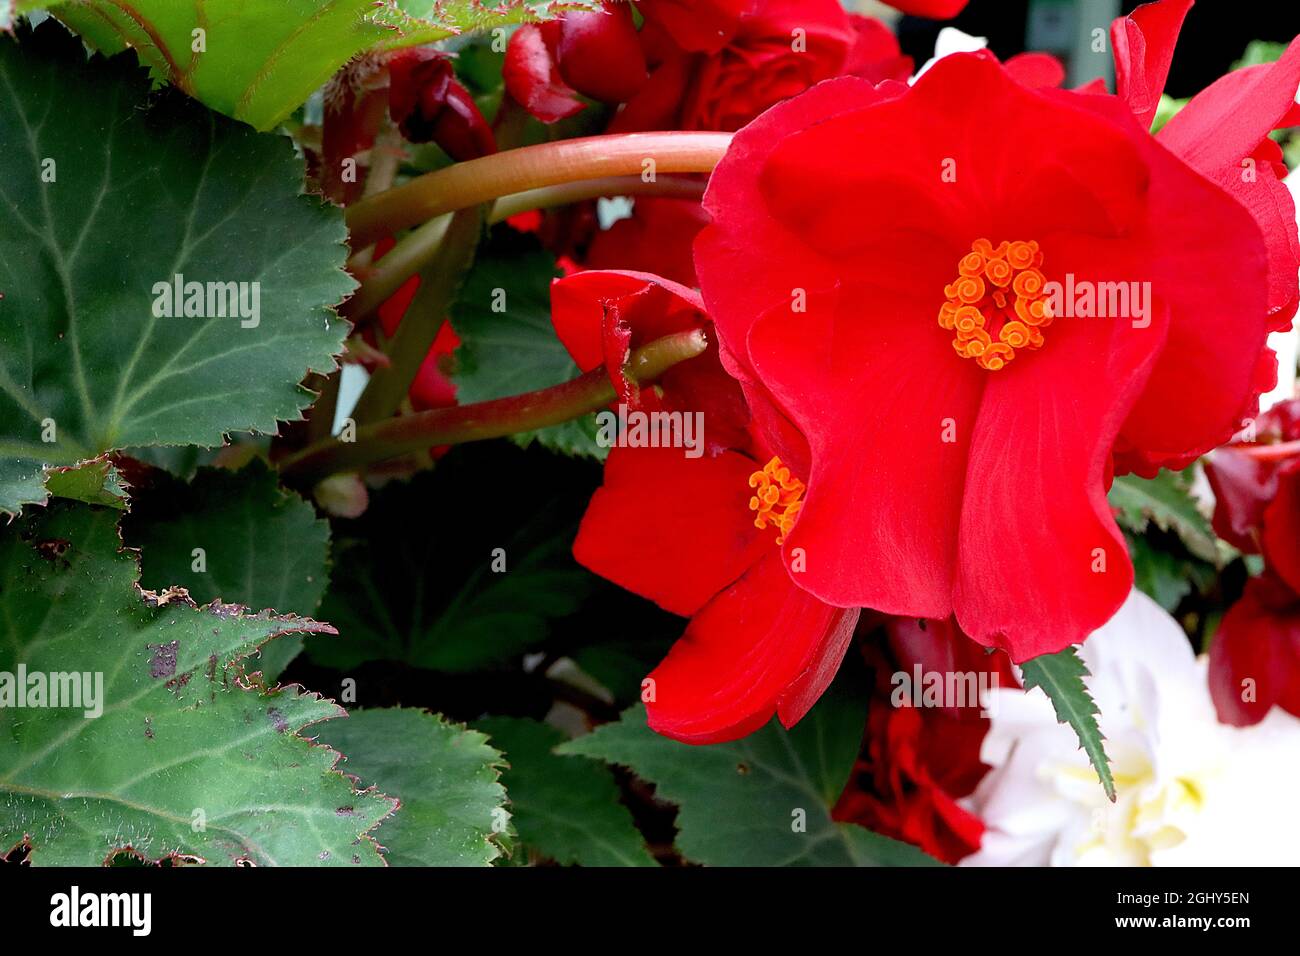 Begonia tuberosa ‘Nonstop Red’ double red flowers and dark green angel-shaped leaves with green veins,  August, England, UK Stock Photo